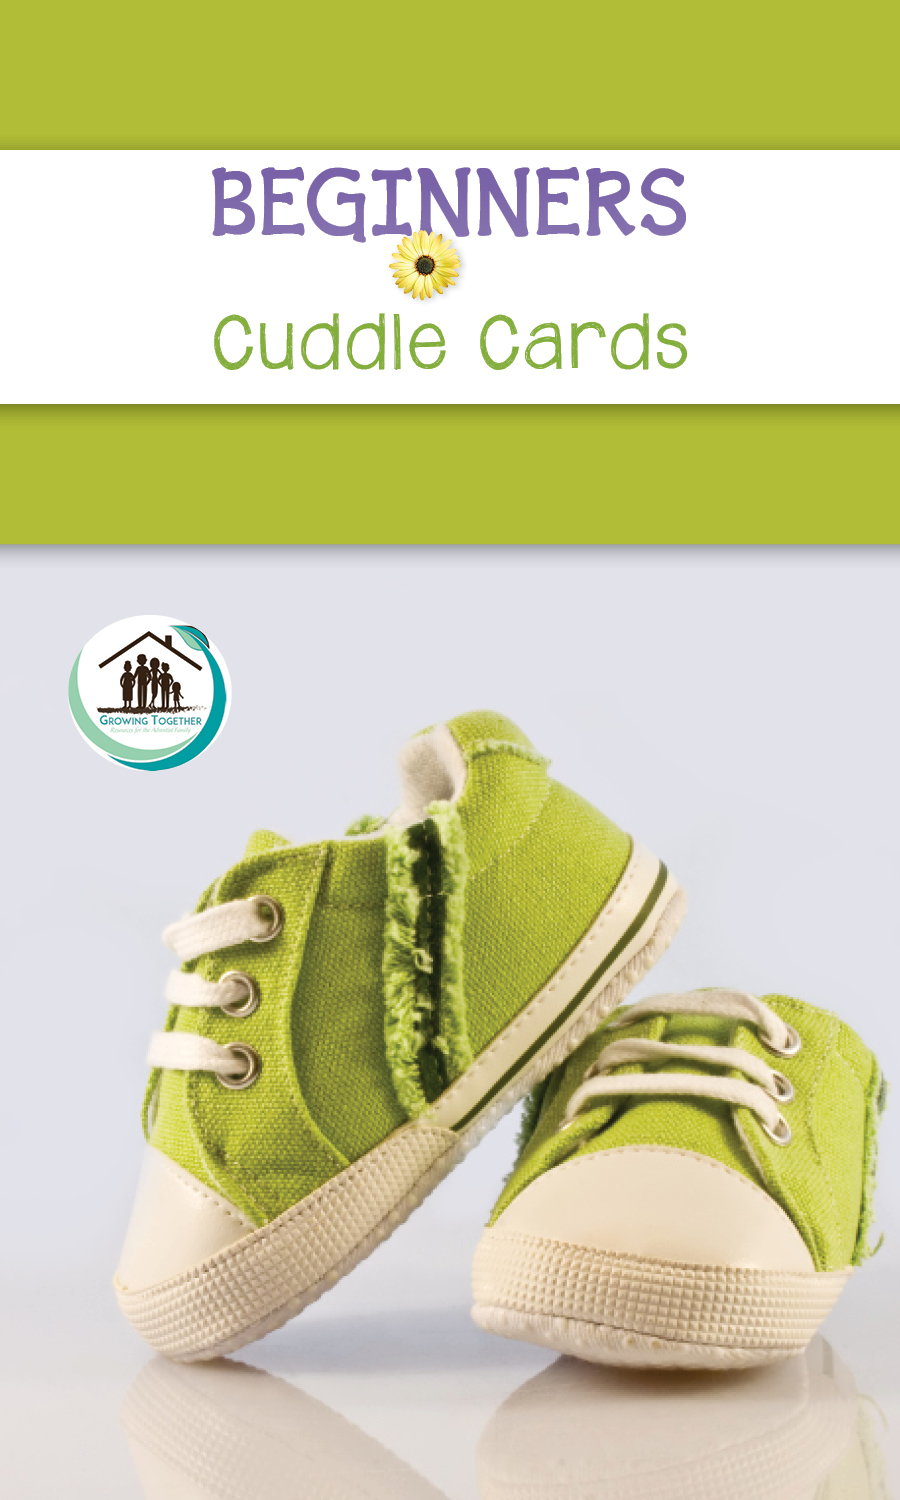 Growing Together SS Curriculum 1st Qtr 2019 - Cuddle Cards (5)